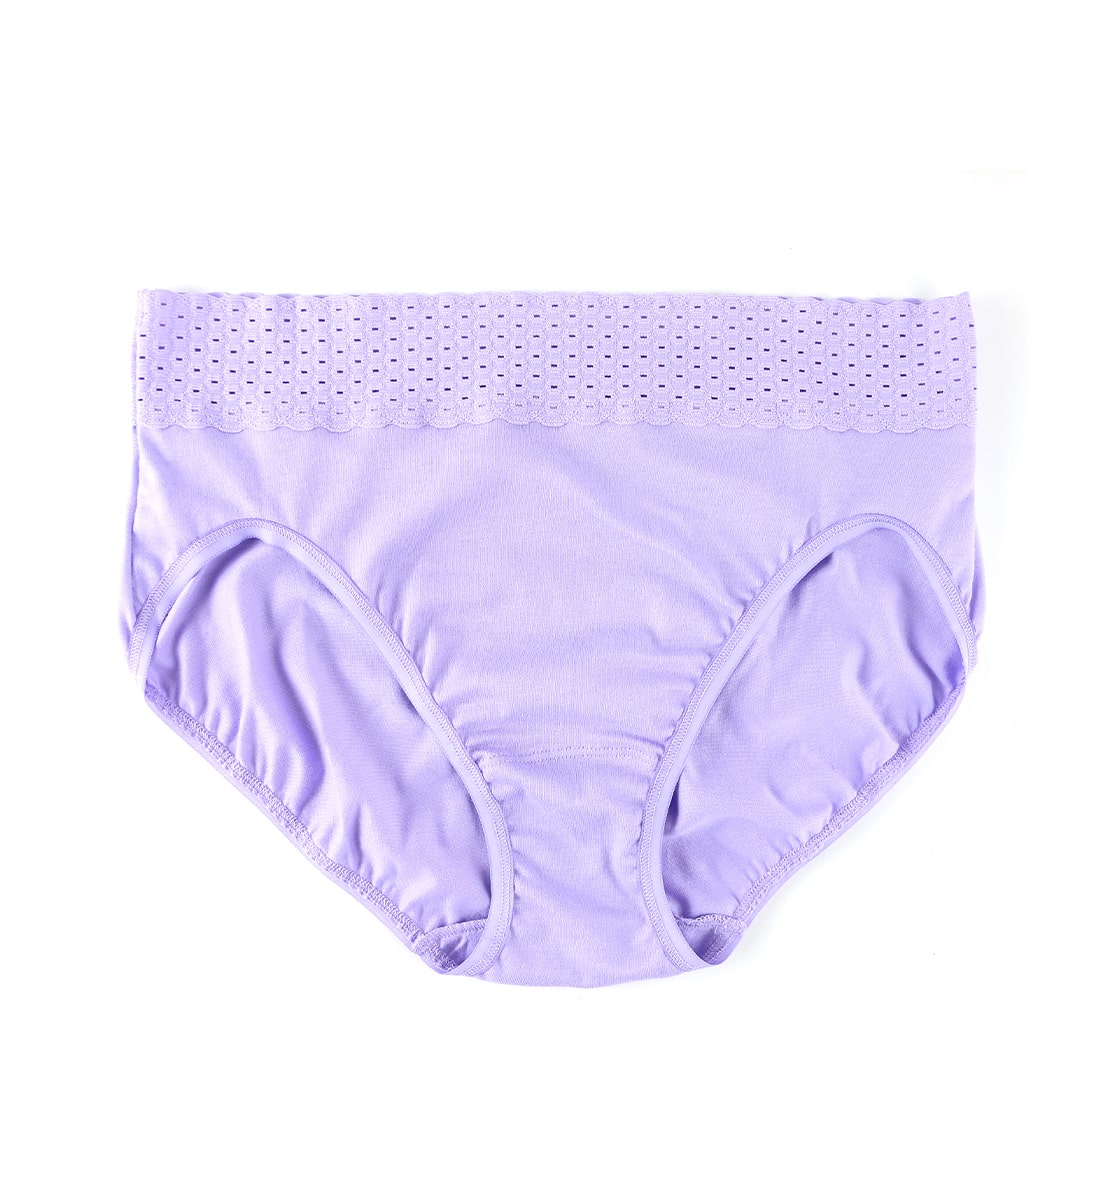 Hanky Panky Cotton French Brief with Lace (892461)- Folk Song